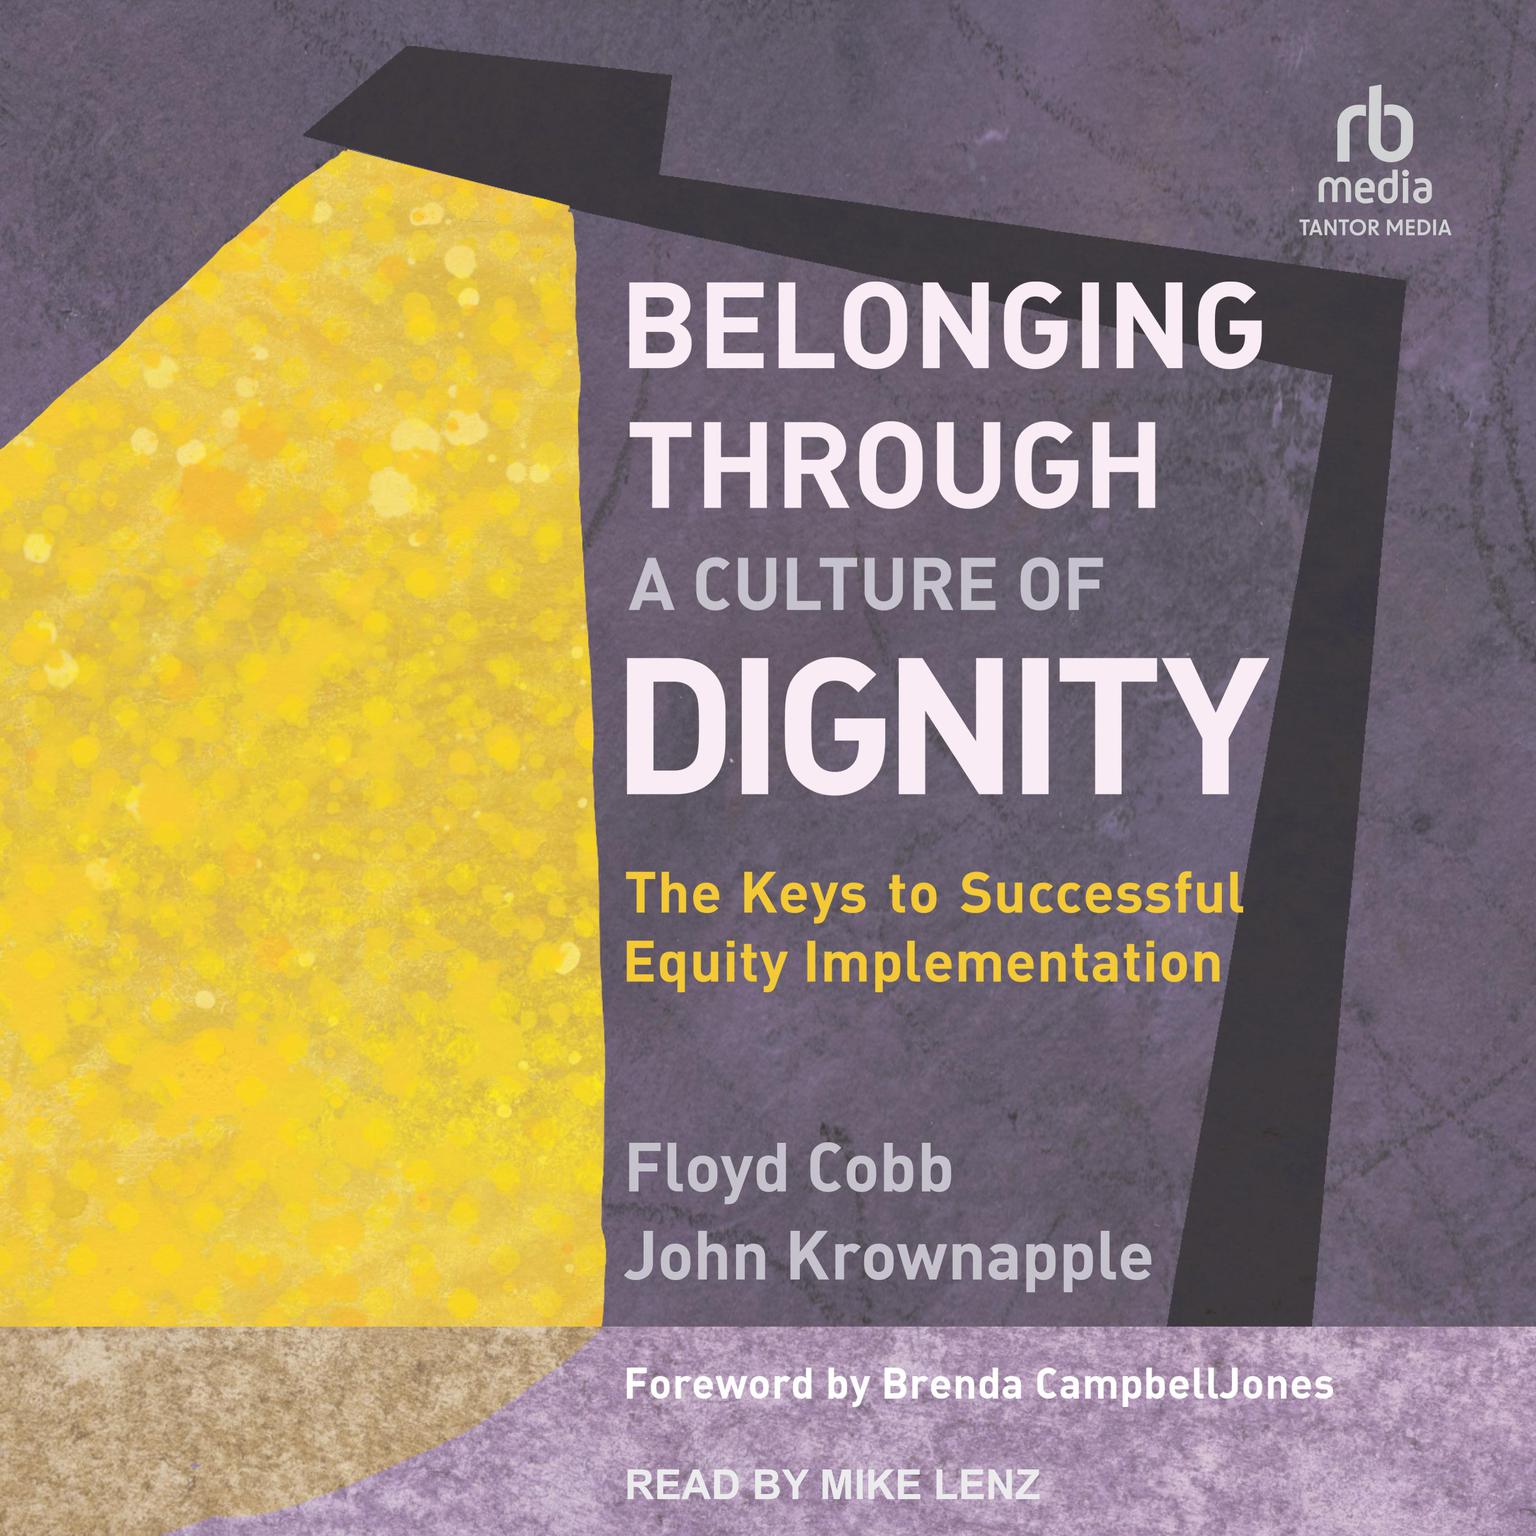 Belonging Through a Culture of Dignity: The Keys to Successful Equity Implementation Audiobook, by Floyd Cobb